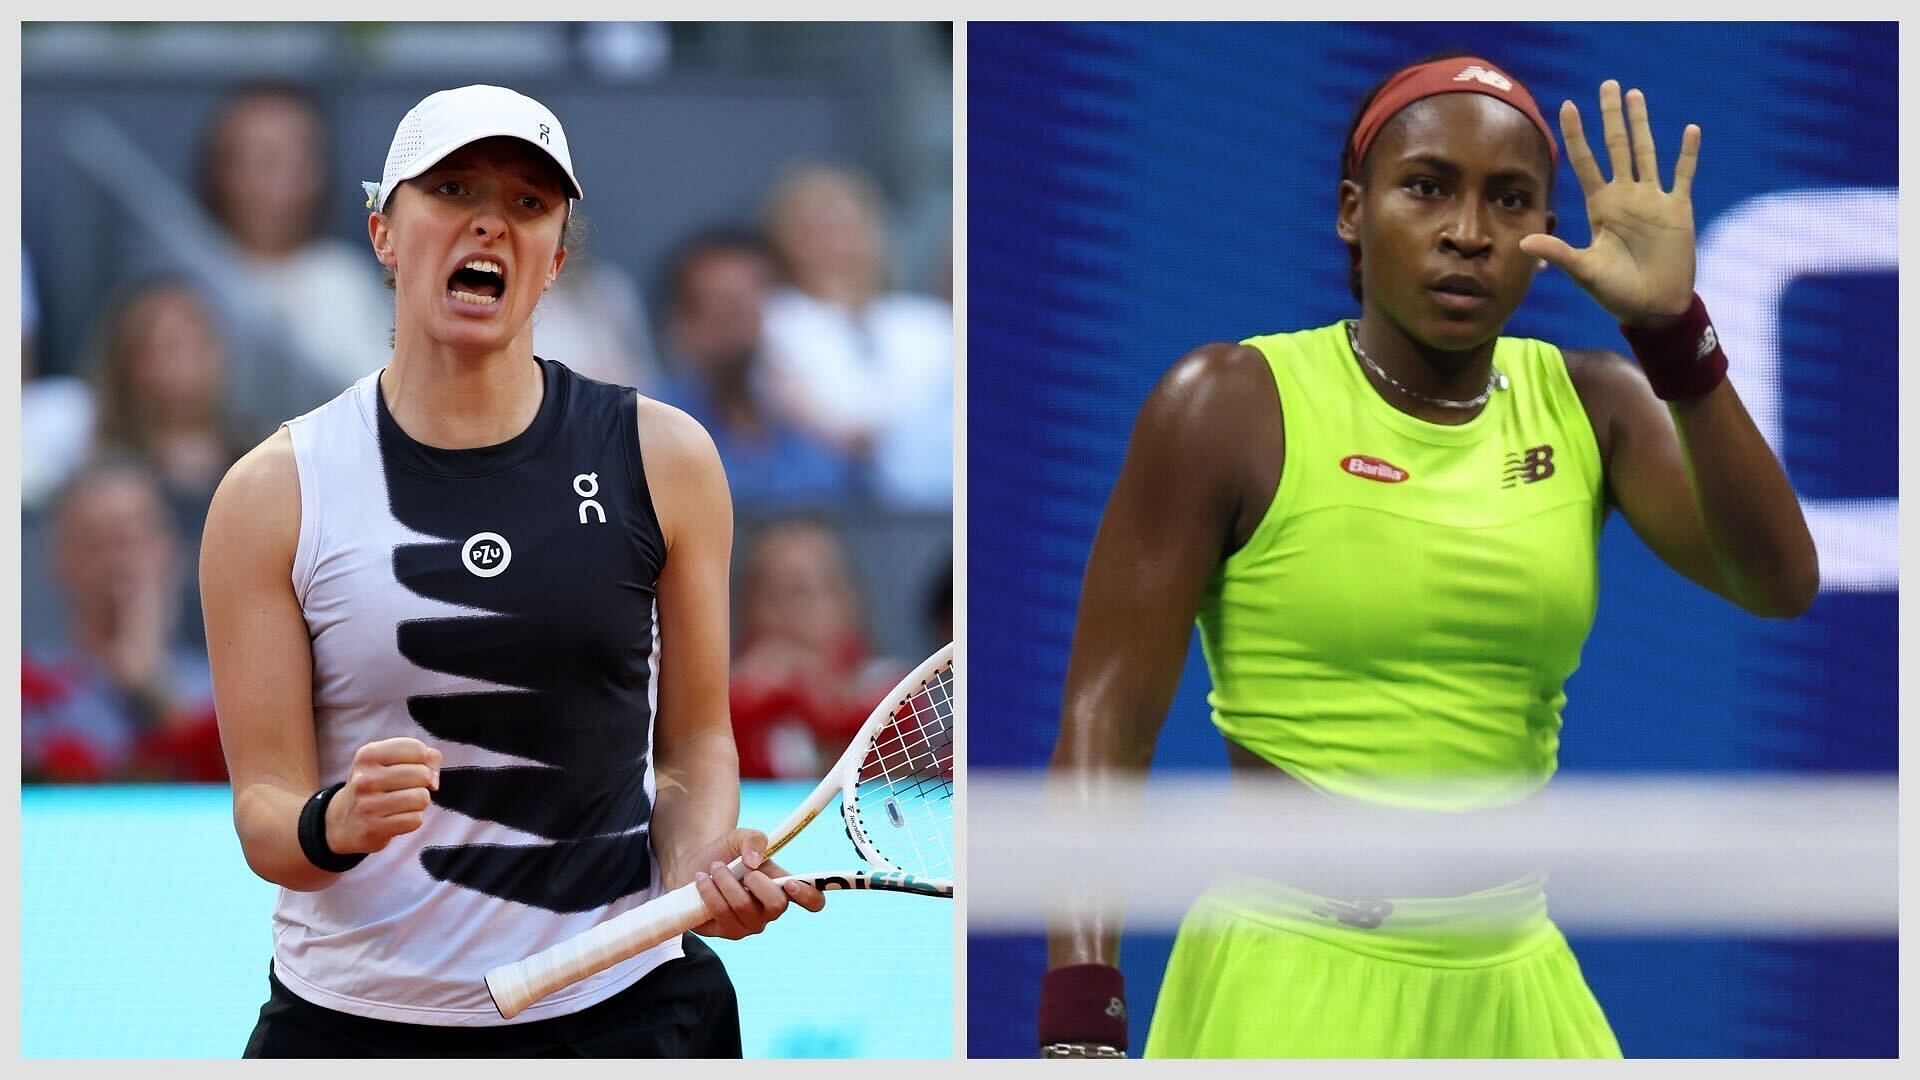 Iga Swiatek vs Coco Gauff Where to watch, TV schedule, live streaming details, and more WTA